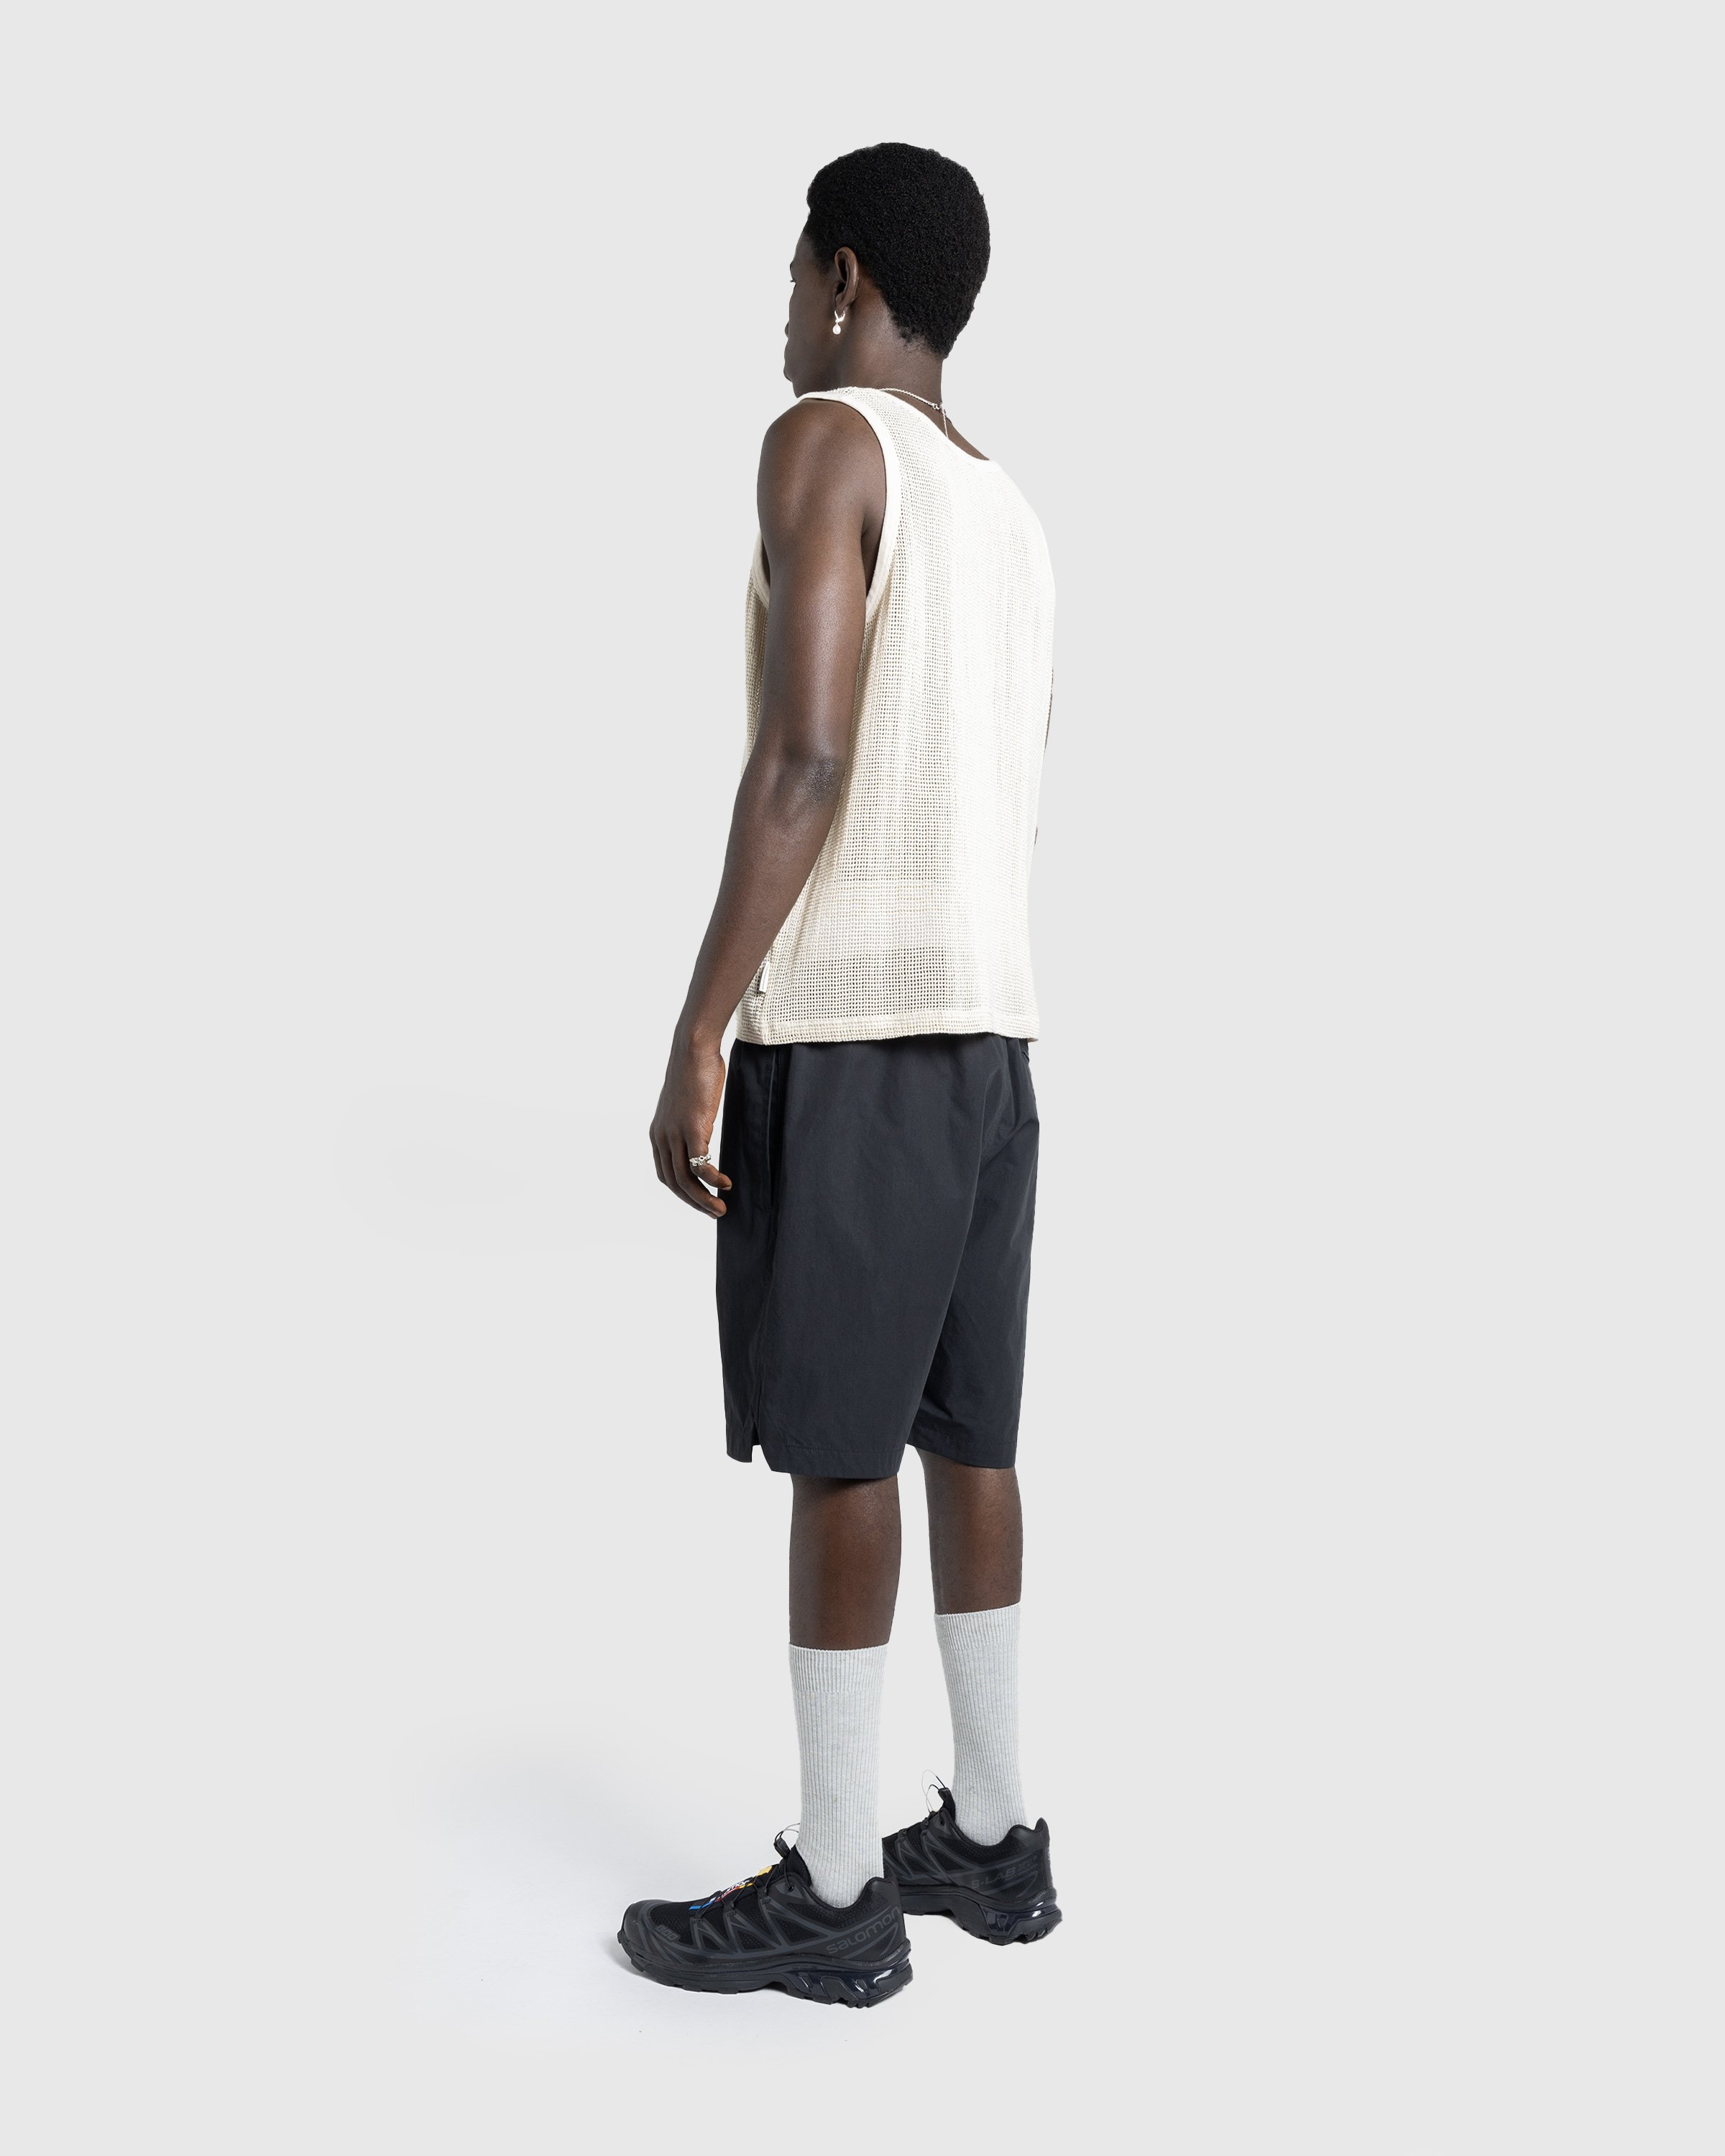 Highsnobiety HS05 - Pigment Dyed Cotton Mesh Tank Top - Clothing -  - Image 5